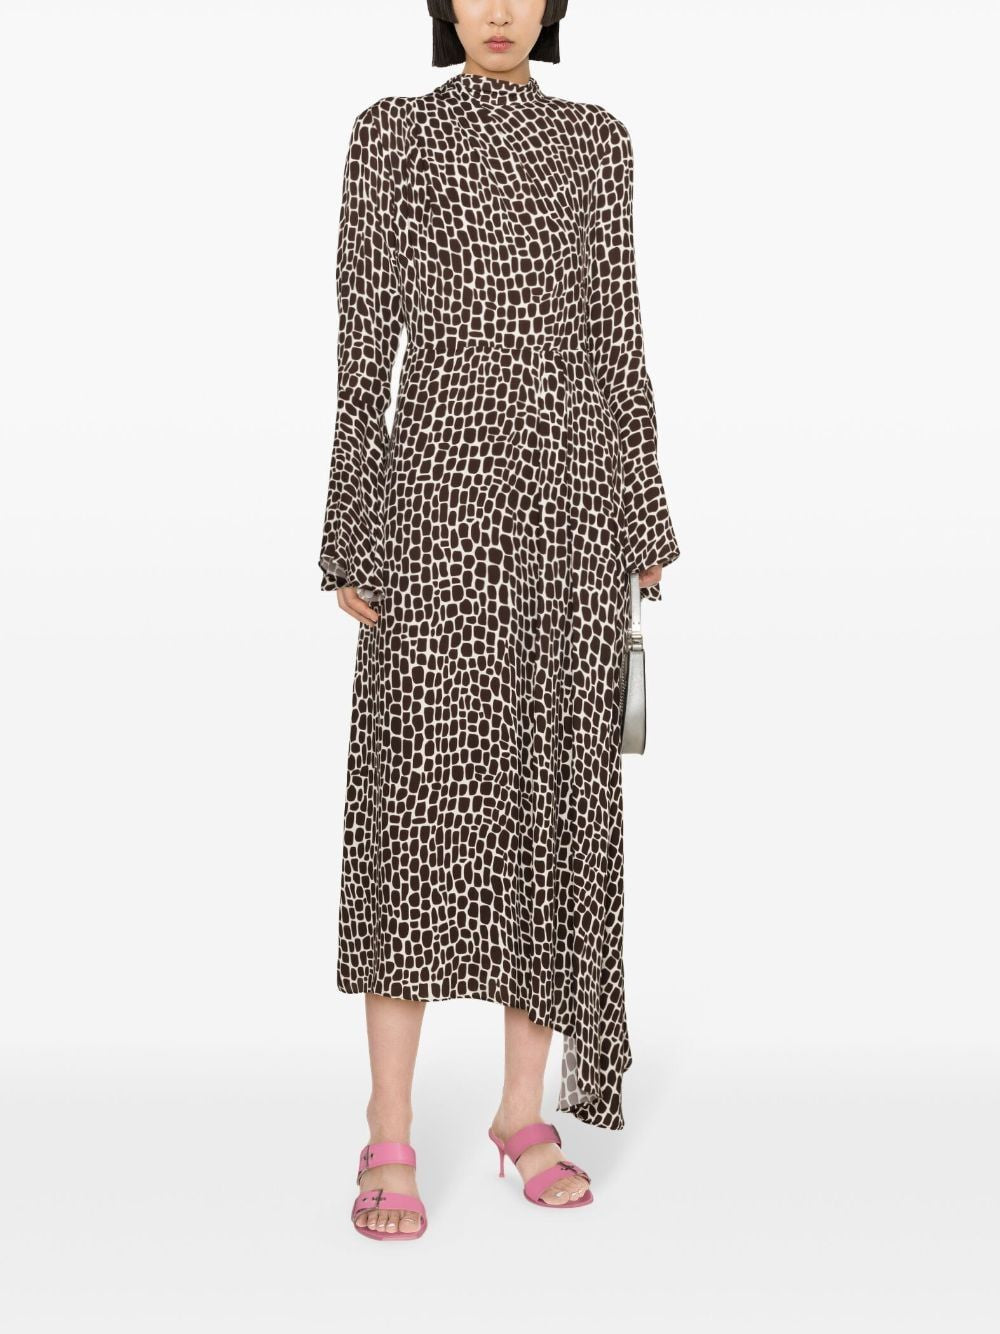 Women's Off White Dress by MSGM